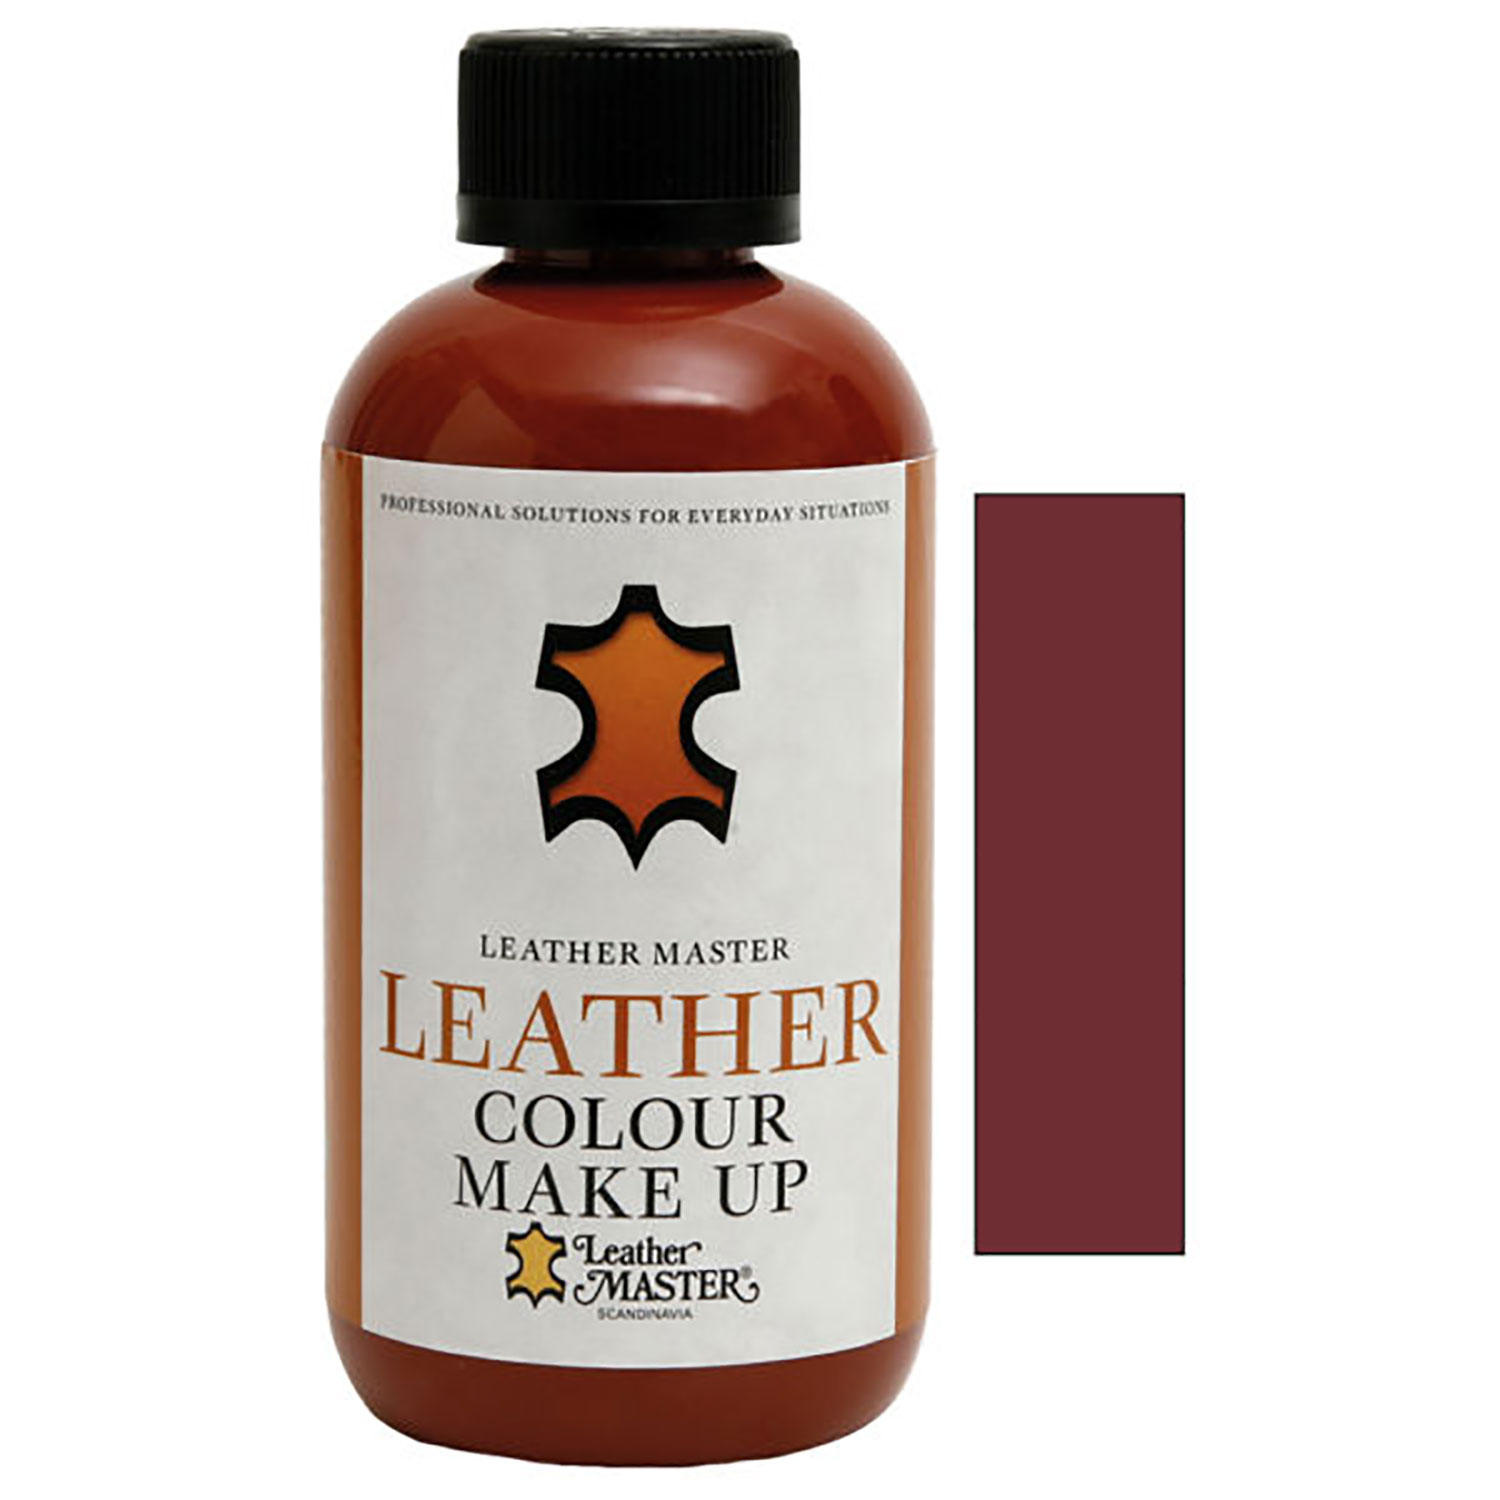 Leather Master Colour make up – red brown 250 ml